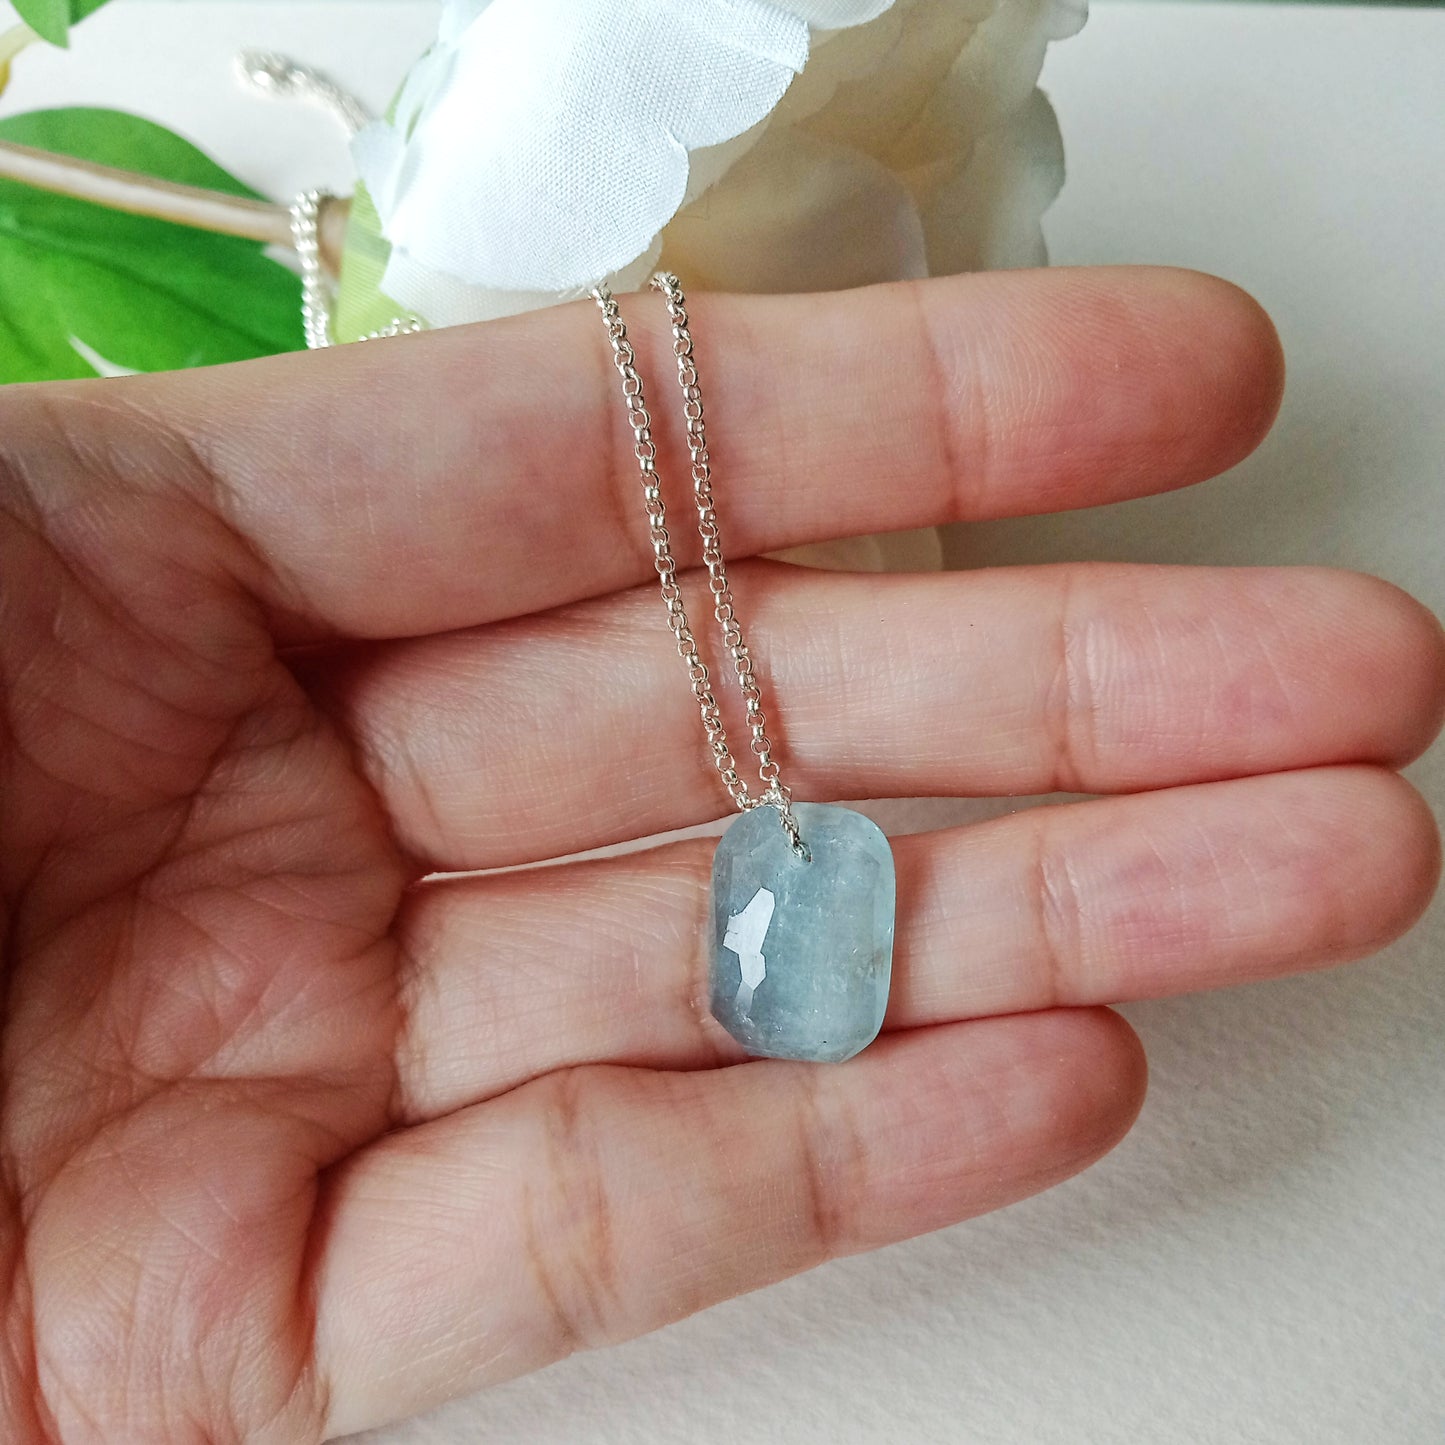 Natural faceted aquamarine cabochon sterling silver necklace